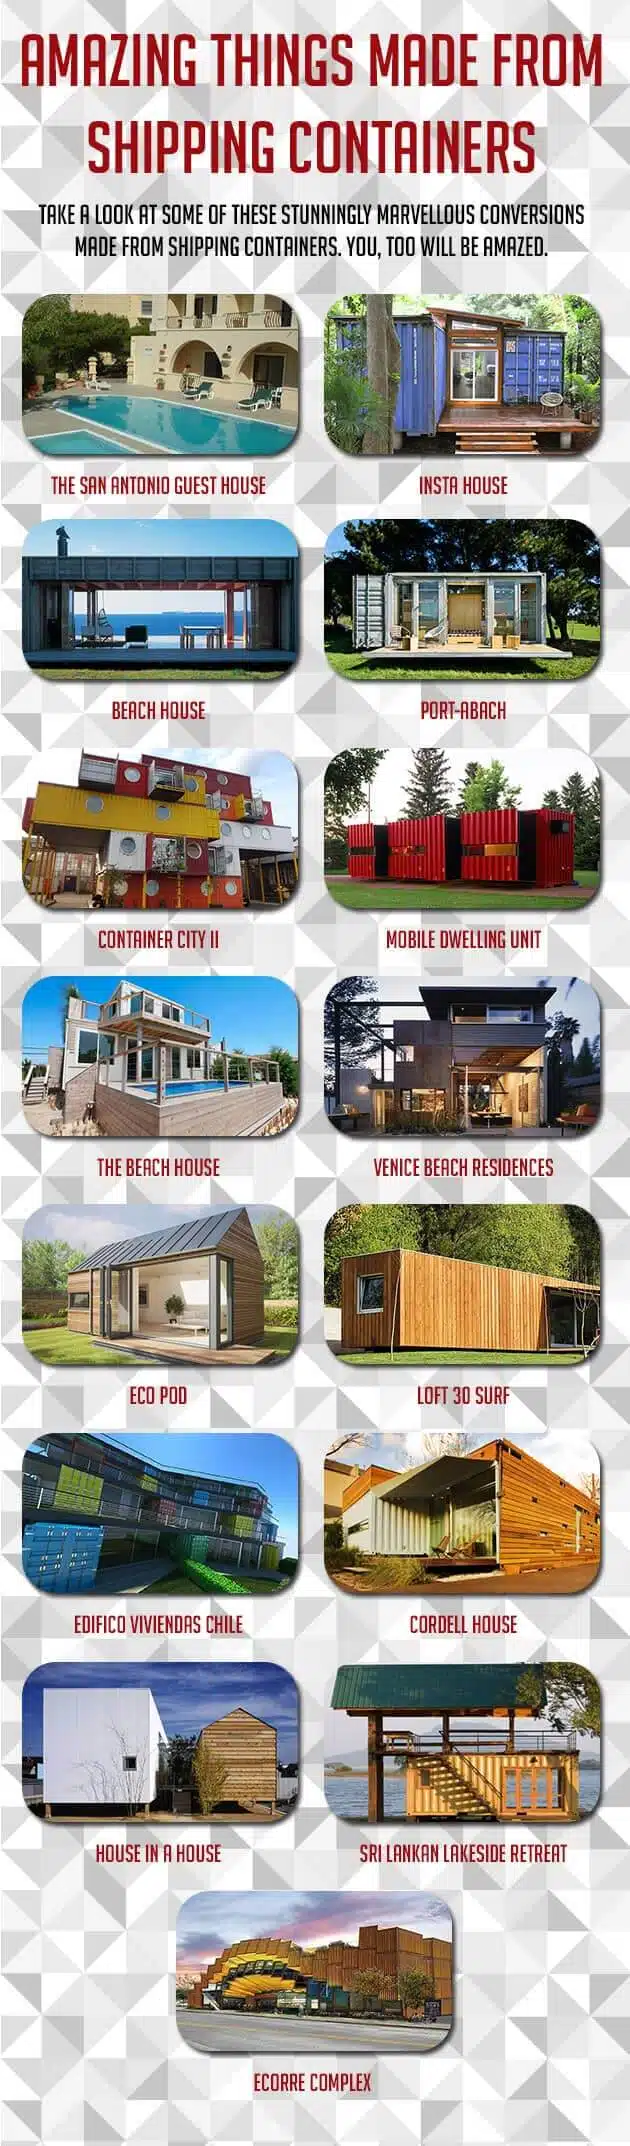 15 Incredible Uses Of Shipping Containers.